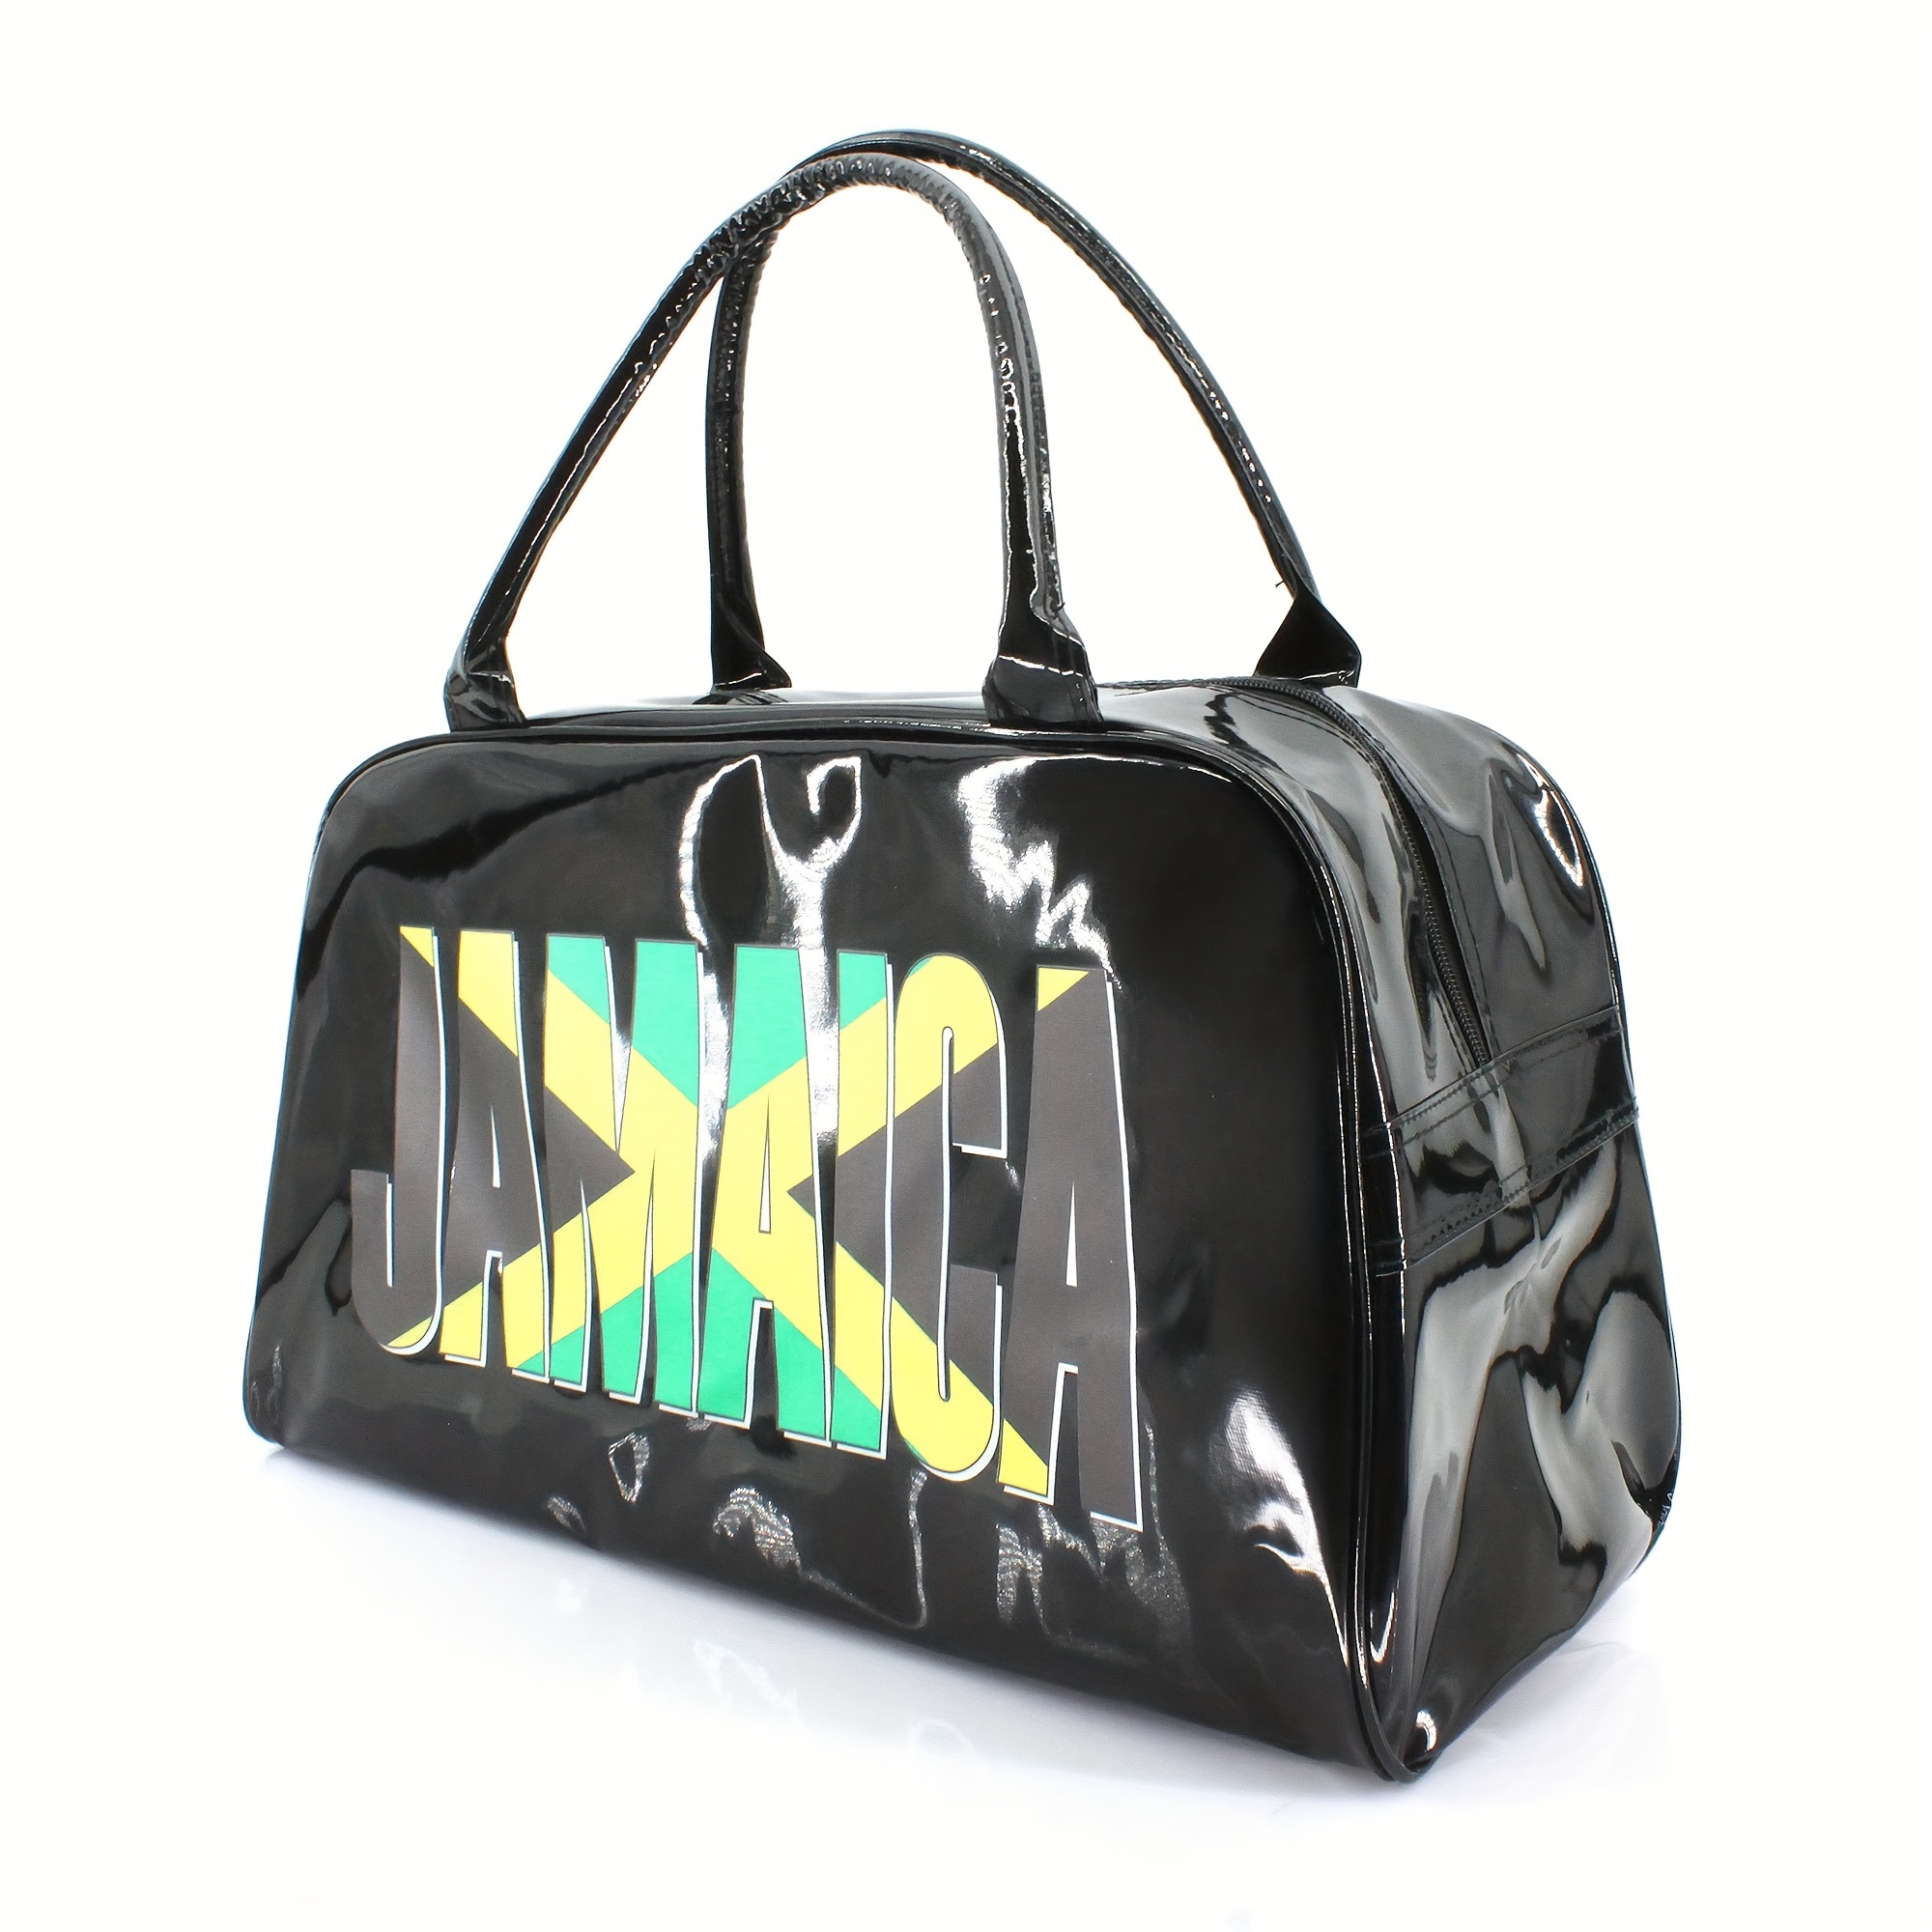 

Retro Jamaica Flag Print, Glossy Black Duffel Bag, 18x11x8.7 Inches, Faux Leather, Ethnic Style, Travel & Gym Storage Carry-on Bag